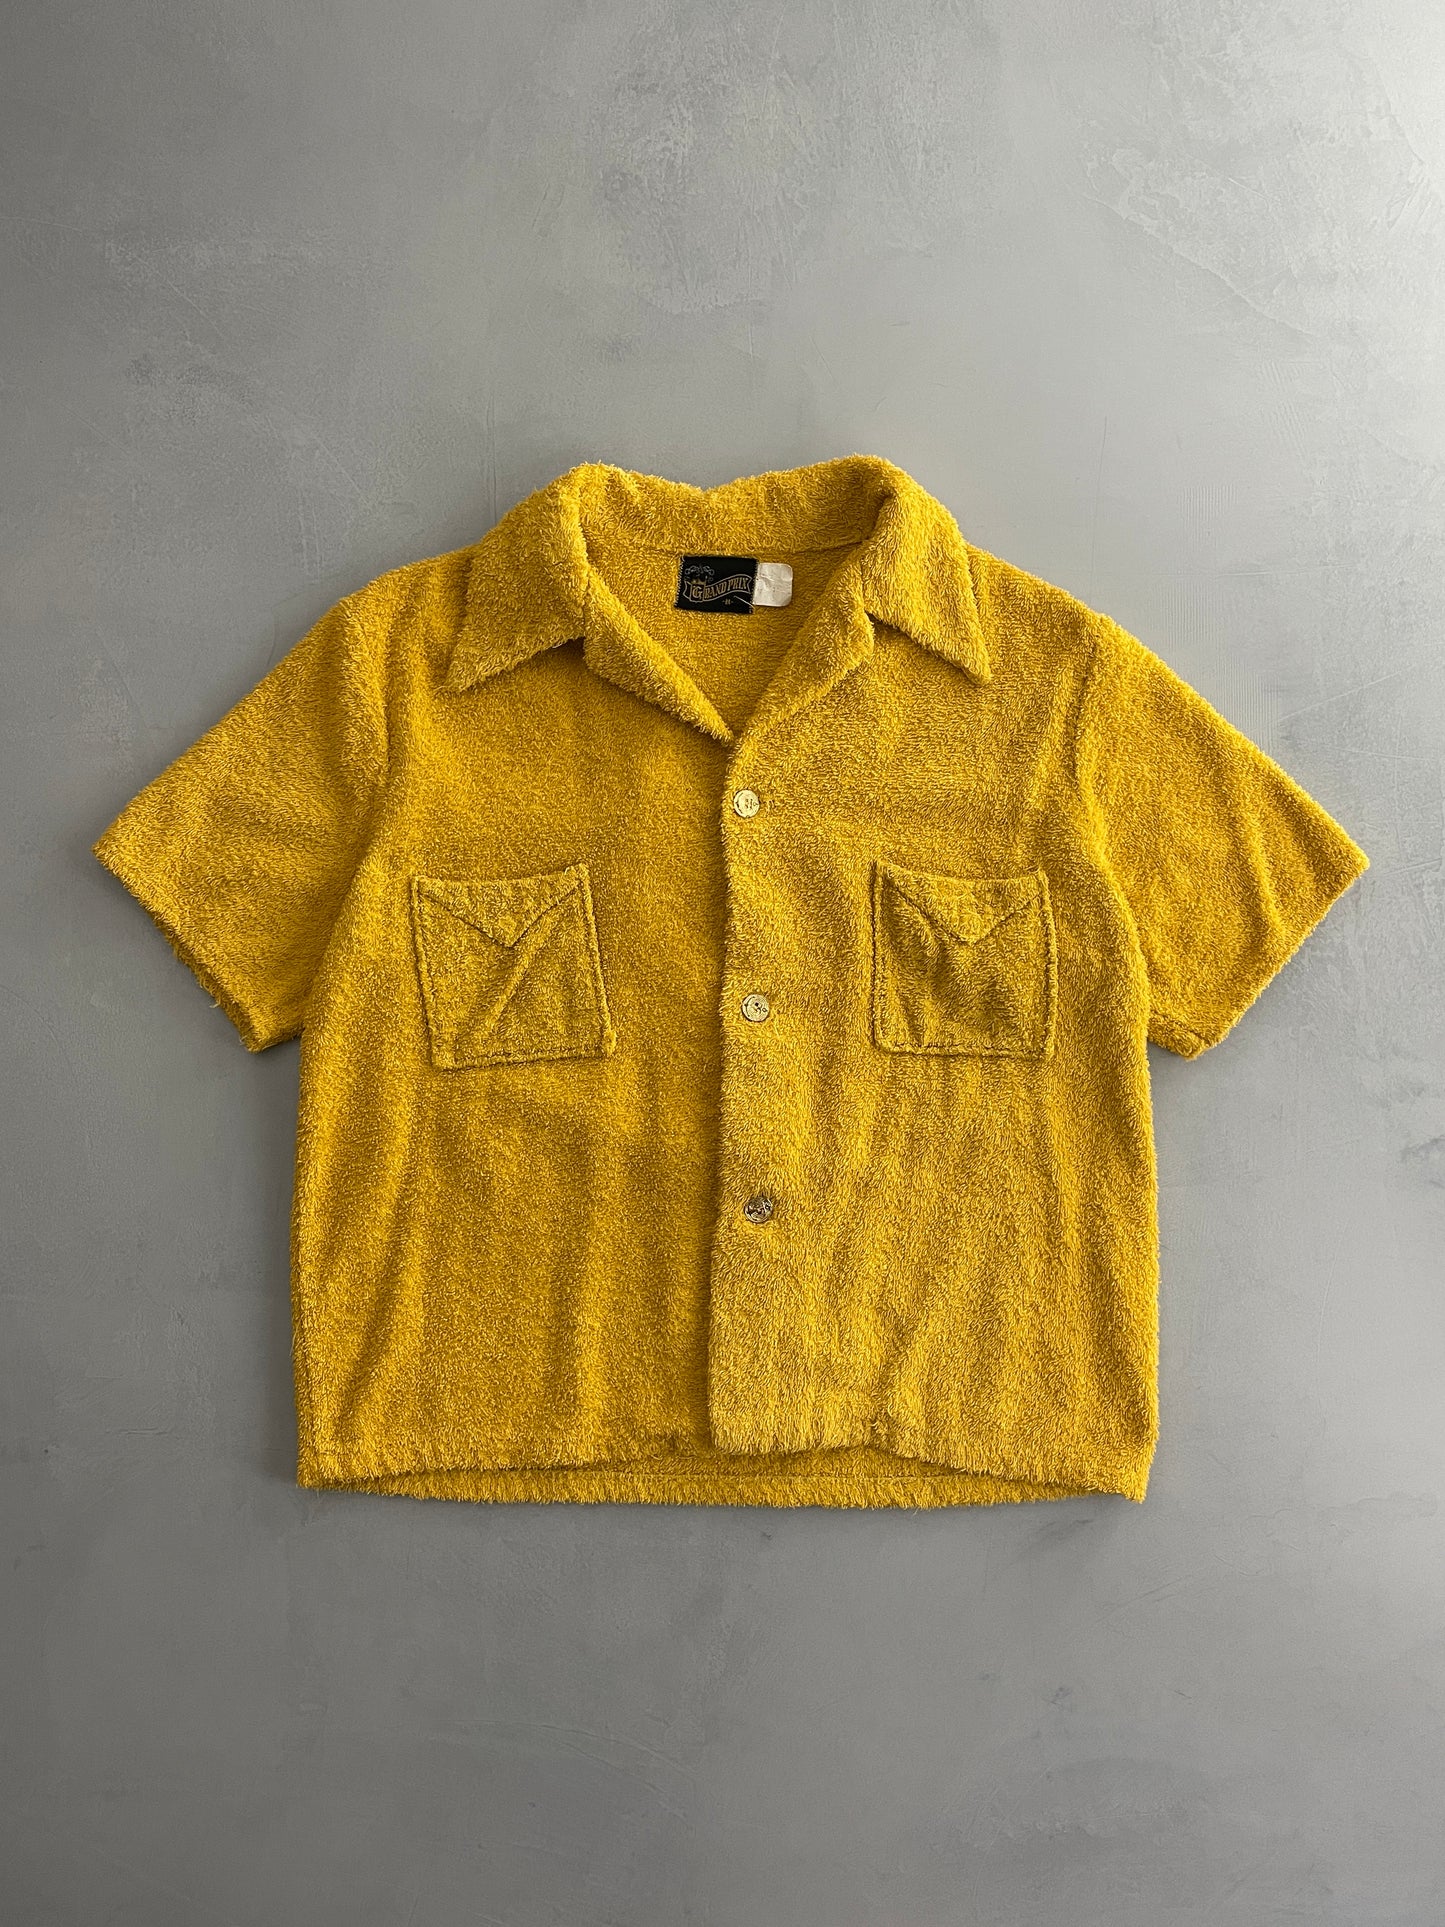 70's Terry Towelling Shirt [M]